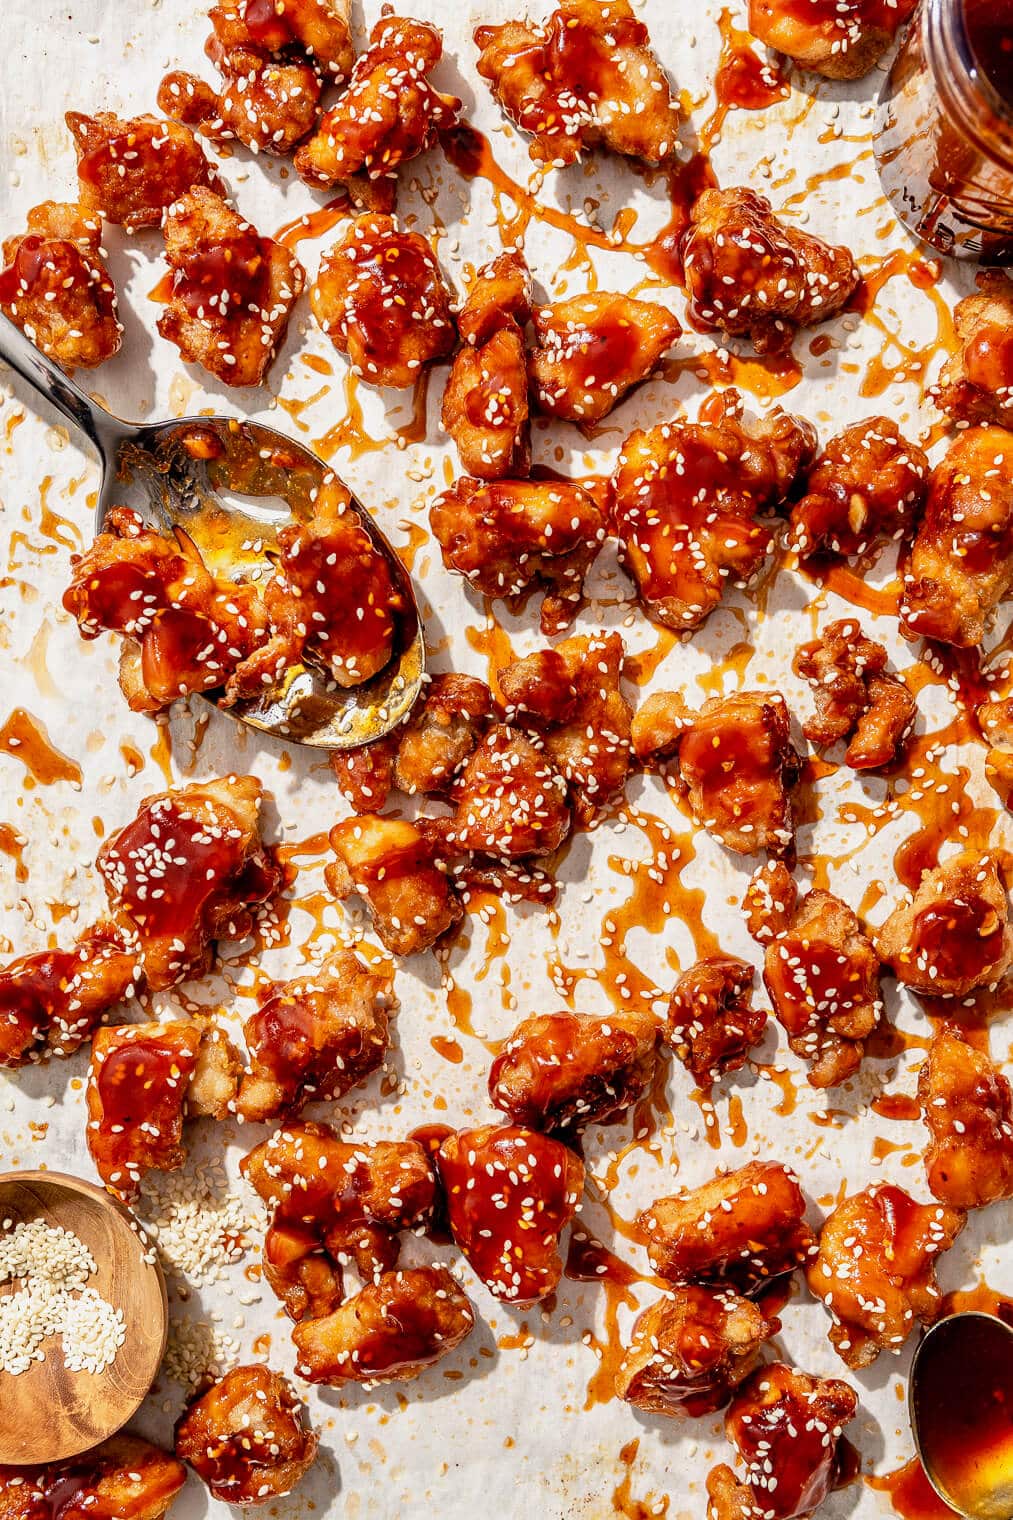 A parchment paper lined sheet pan with honey sesame chicken on it. Also on the sheet pan: a jar of honey sesame sauce, a small wooden bowl of sesame seeds, and two spoons.